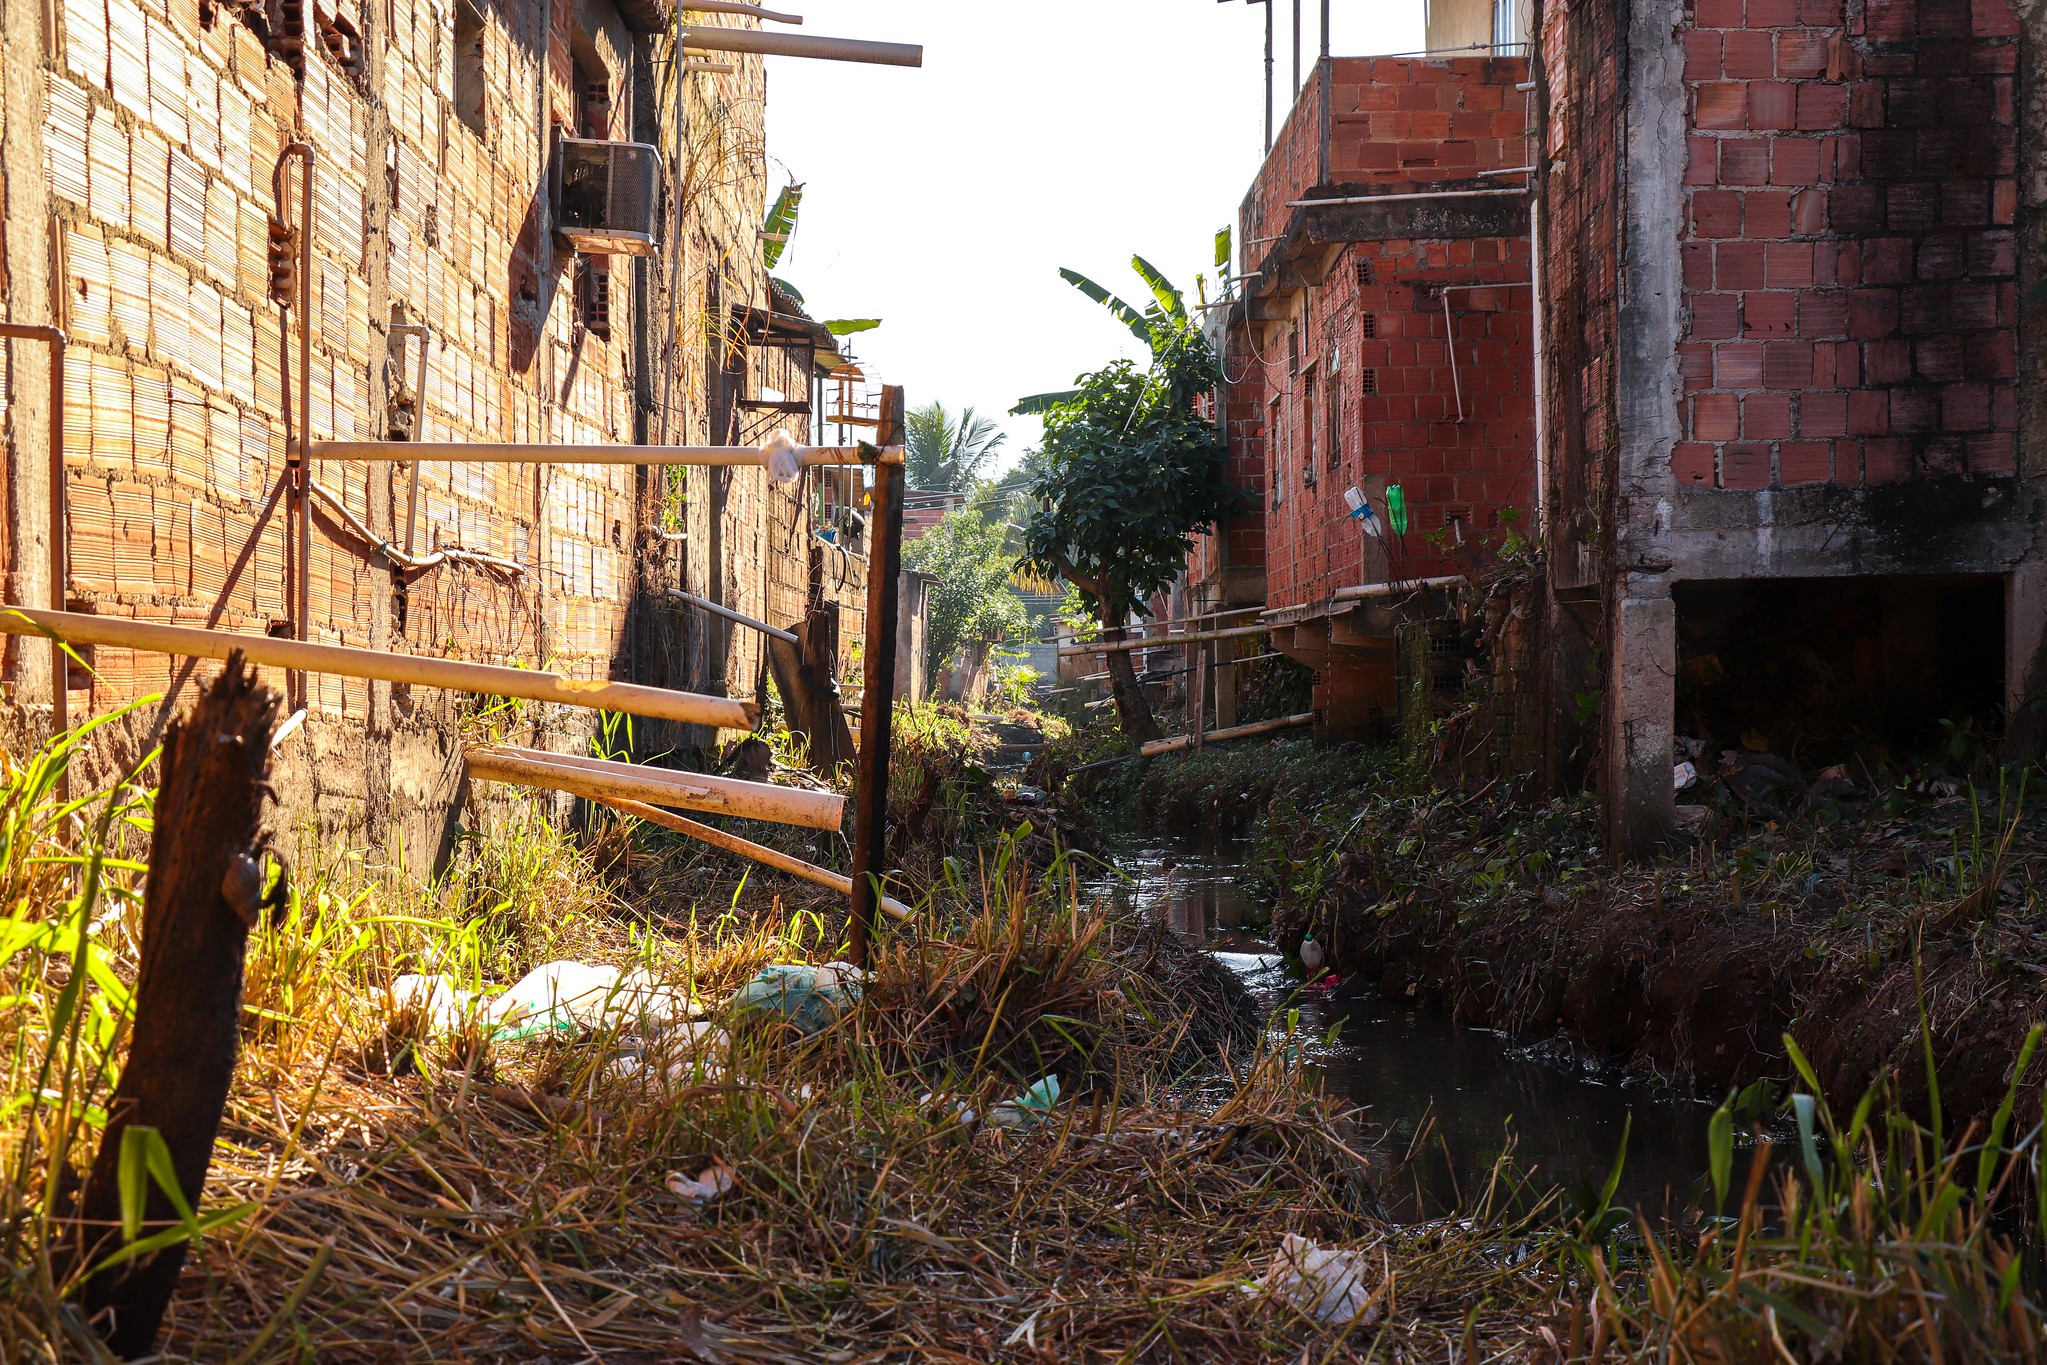 Engenho homes that back up onto the community's open air sewage canal. Photo: Alexandre Cerqueira